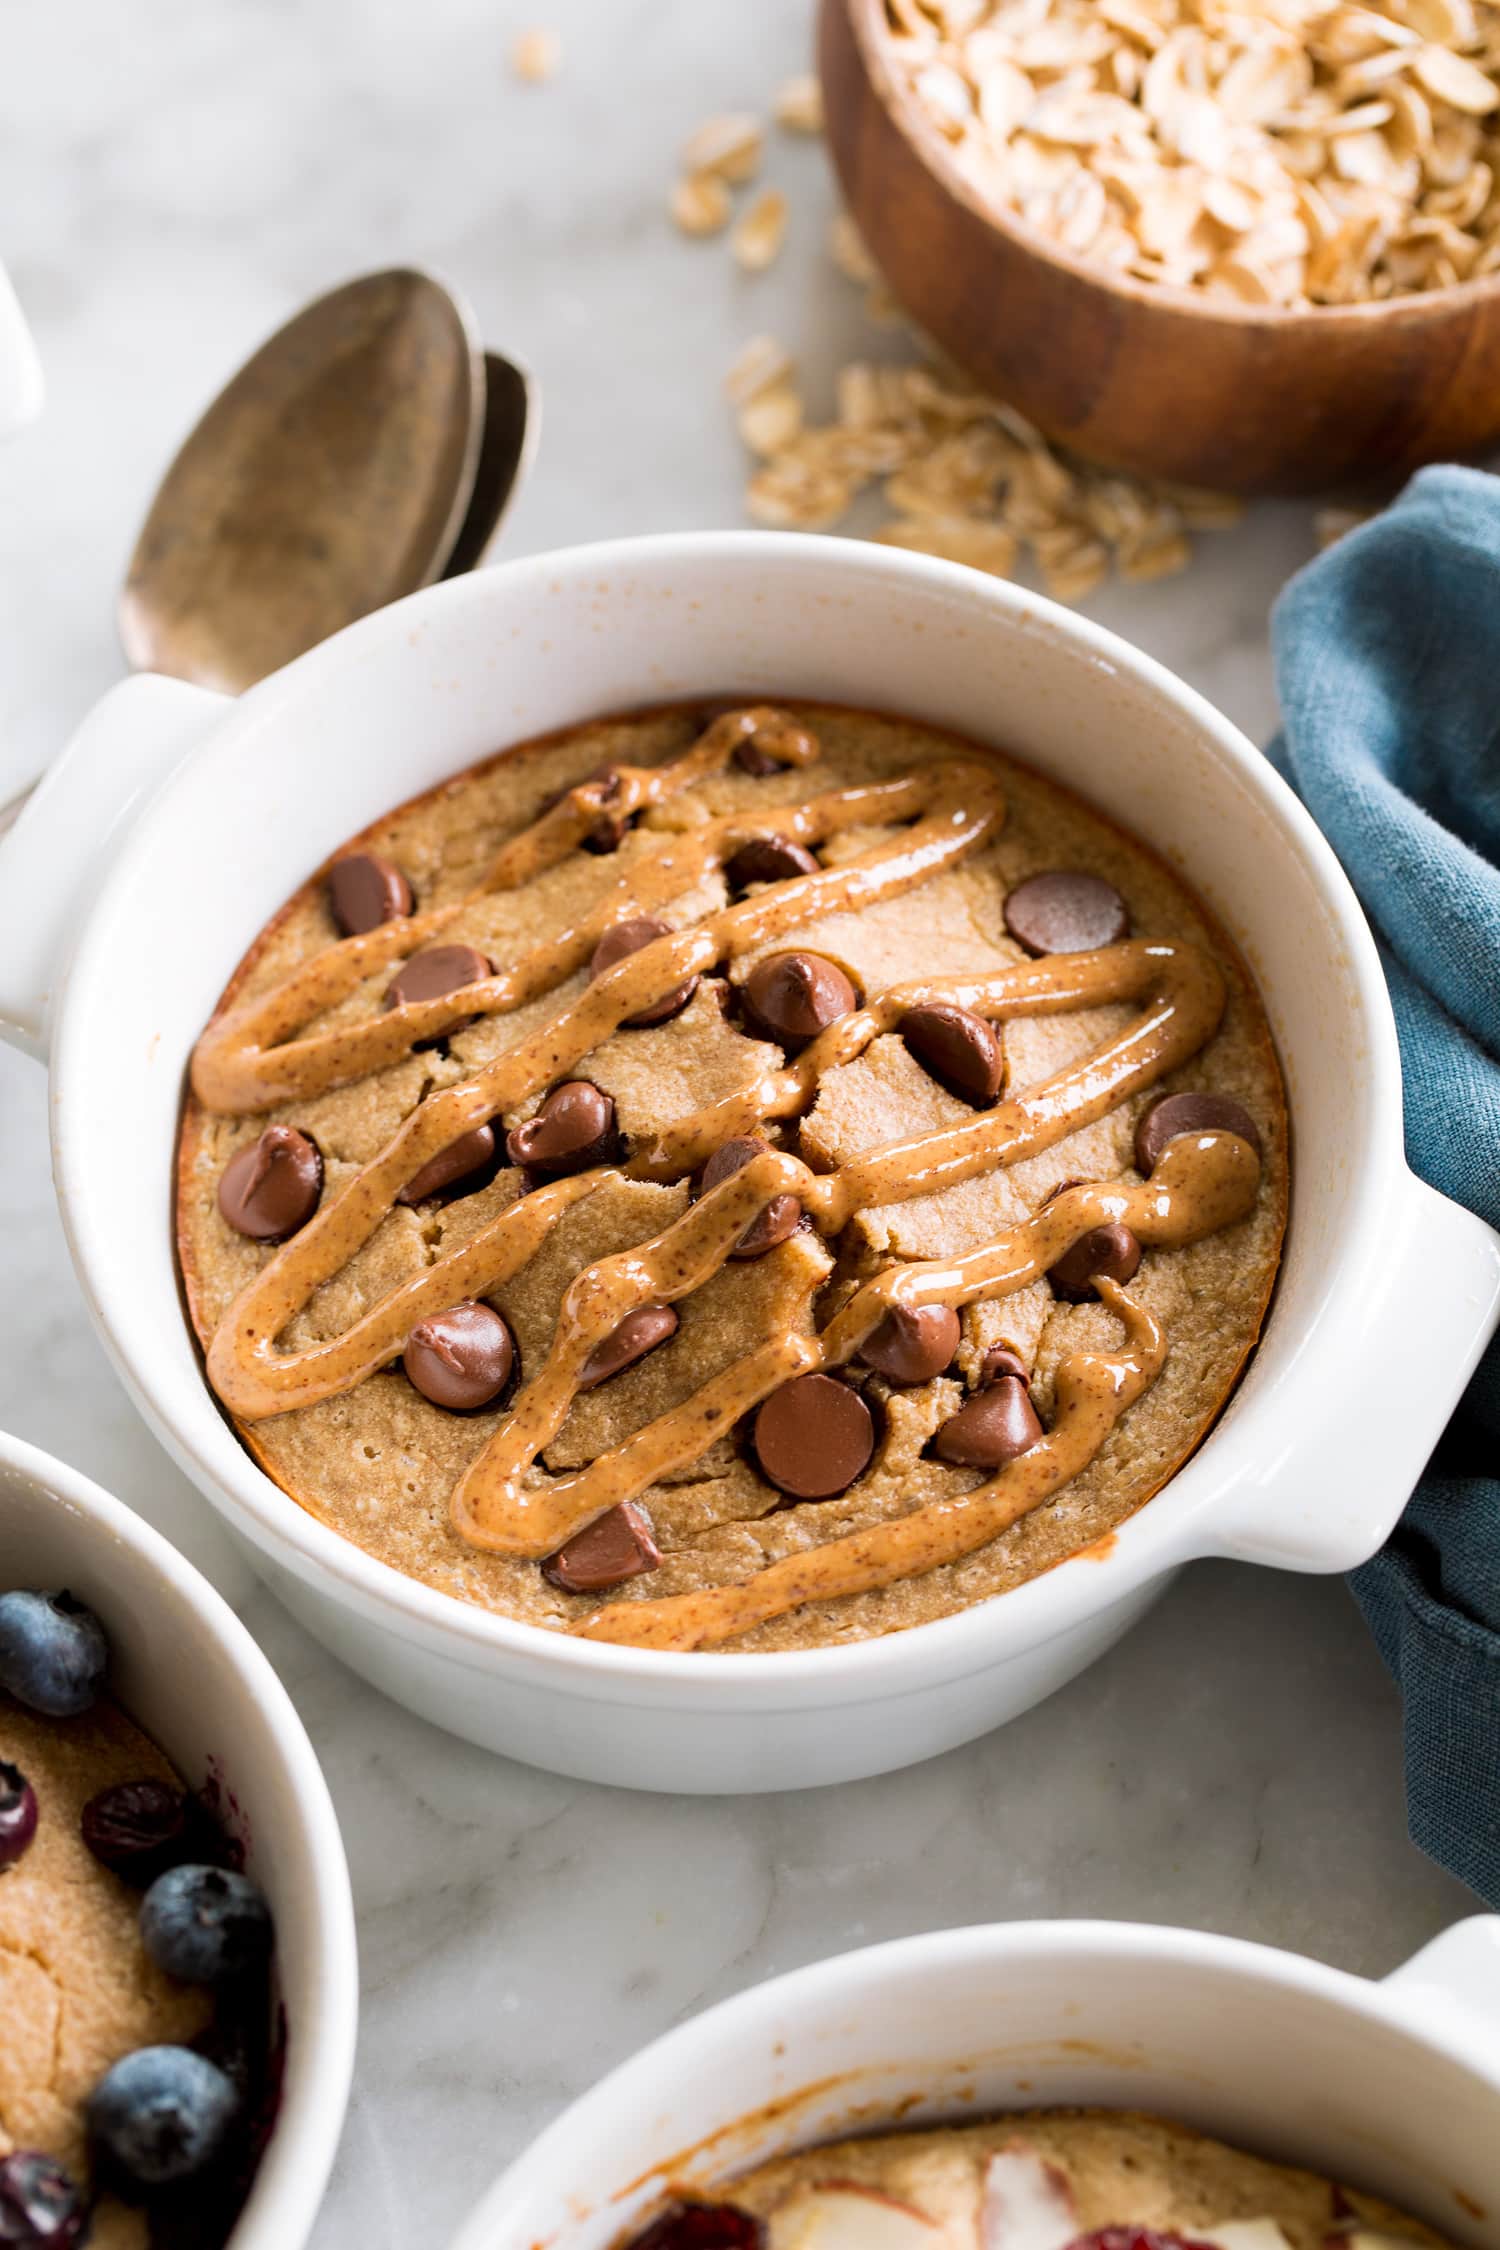 Chocolate chip almond butter baked oats.